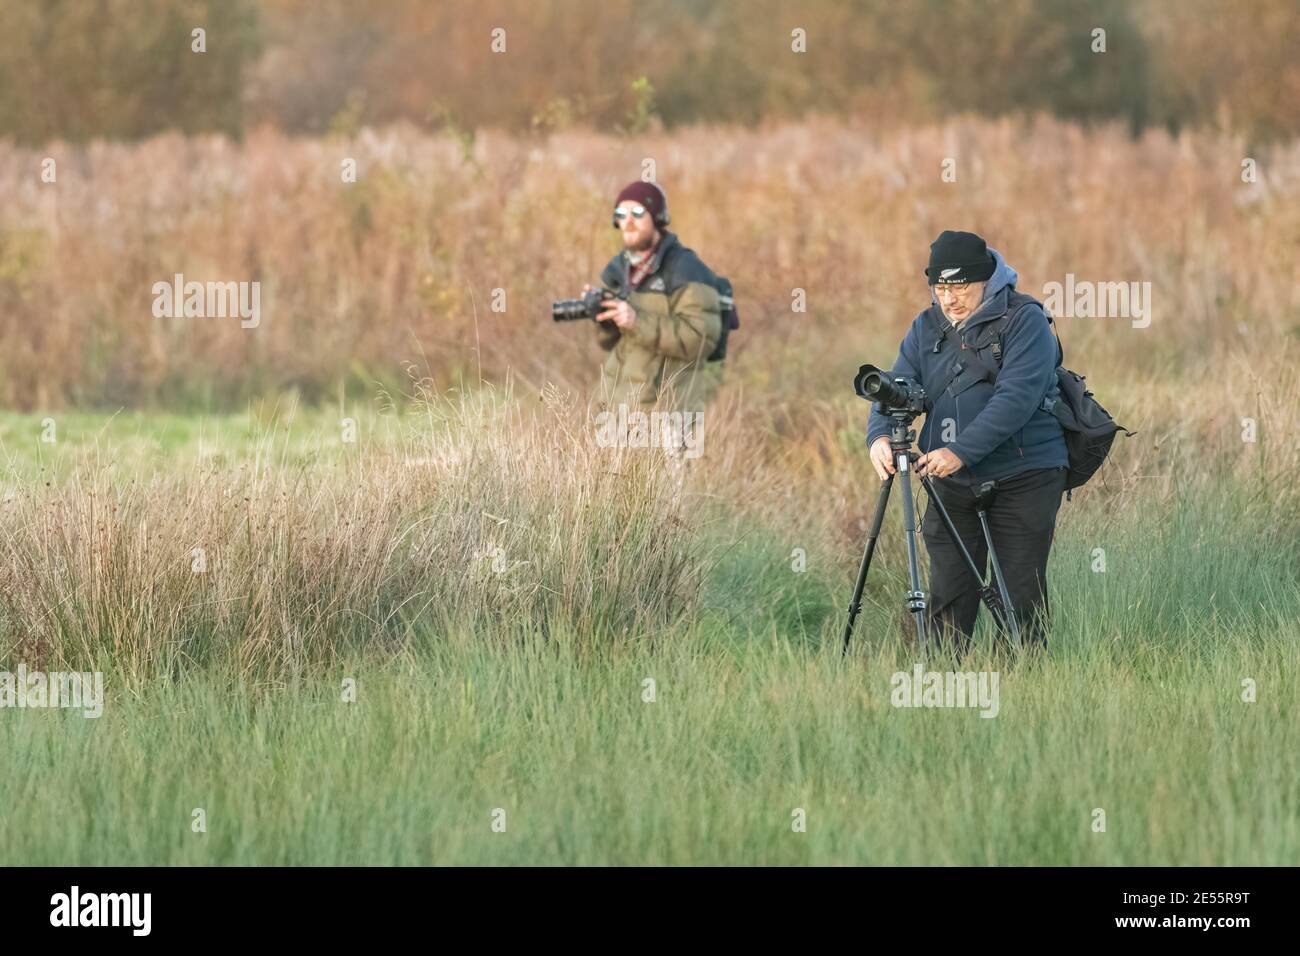 Two photographers standing in fields of long grass, with the closer man preparing a tripod. Stock Photo